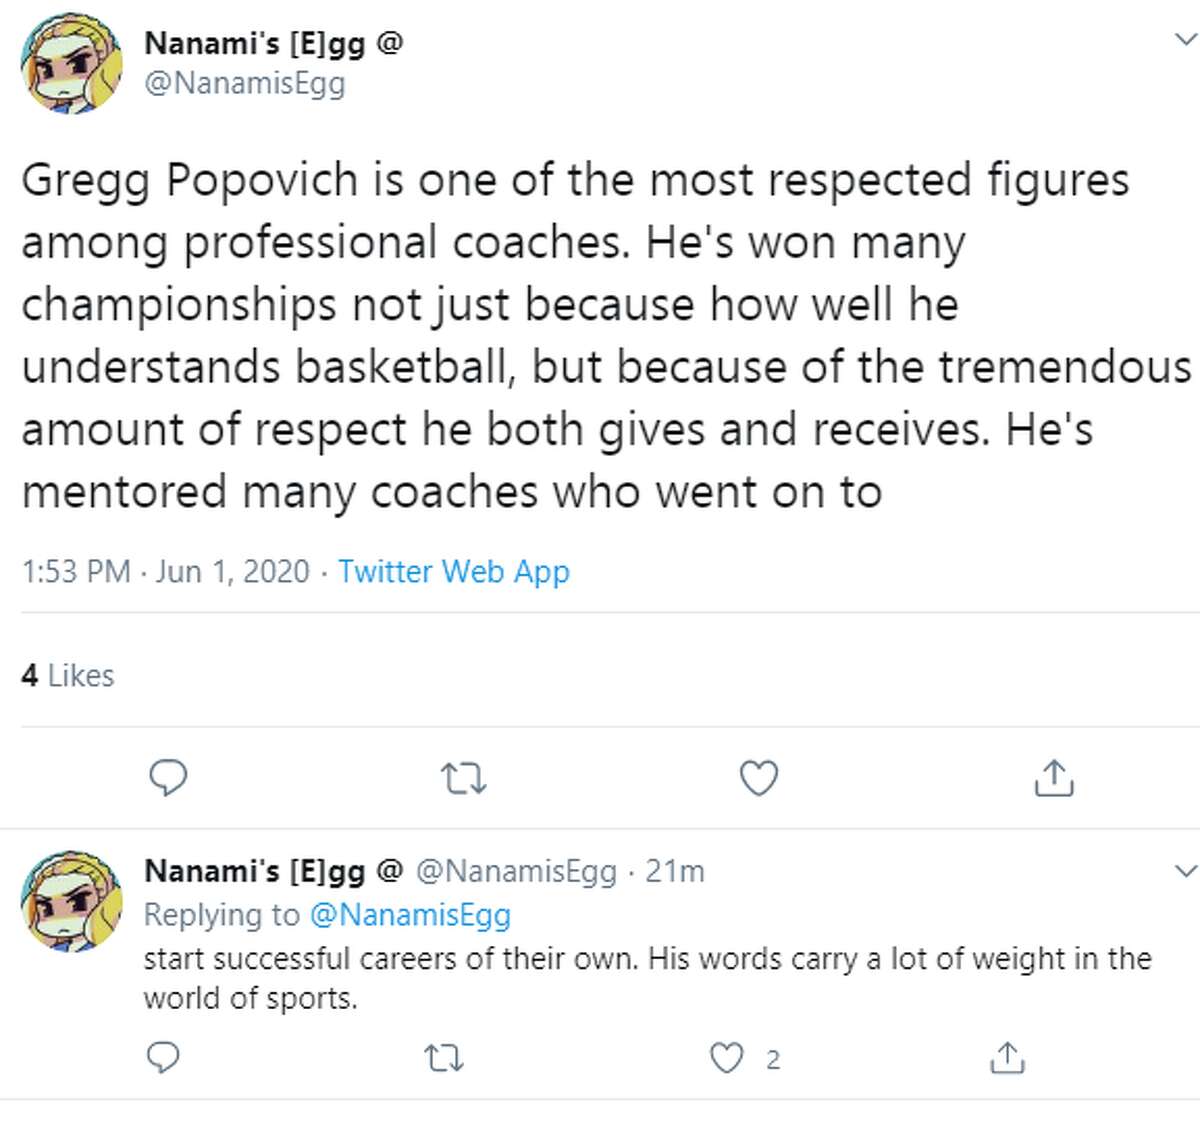 @NanamisEgg: Gregg Popovich is one of the most respected figures among professional coaches. He's won many championships not just because how well he understands basketball, but because of the tremendous amount of respect he both gives and receives. He's mentored many coaches who went on to start successful careers of their own. His words carry a lot of weight in the world of sports.